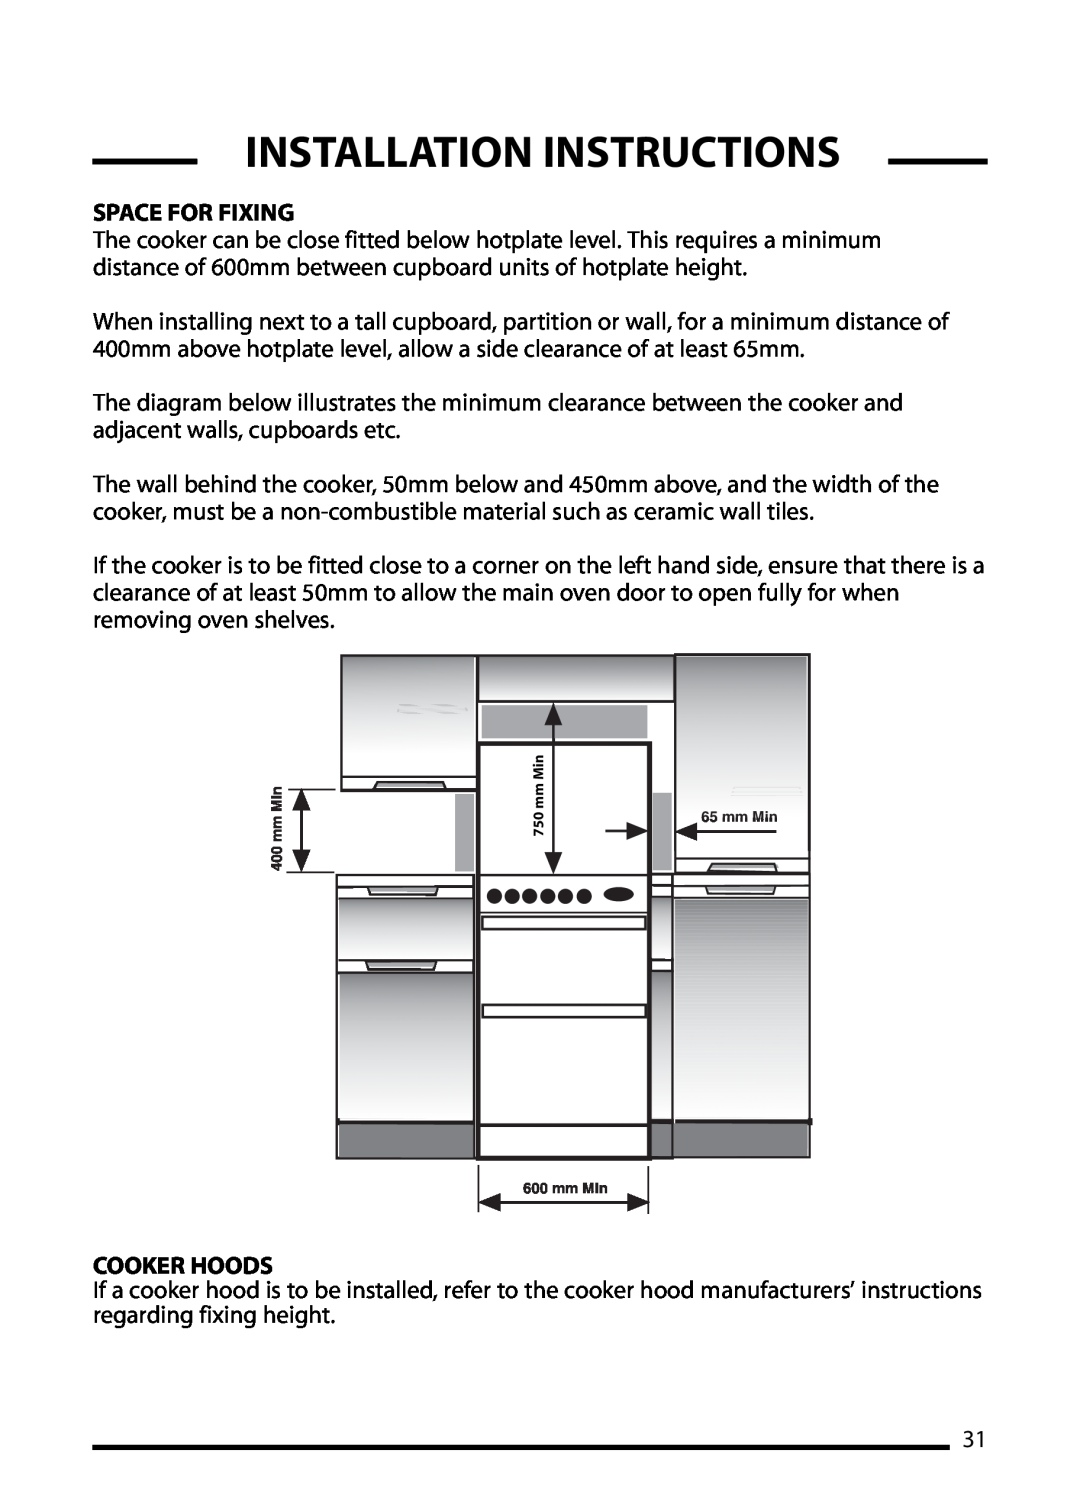 Cannon 10692G, 10698G, 10695G installation instructions Space For Fixing, Cooker Hoods, Installation Instructions, mm Min 